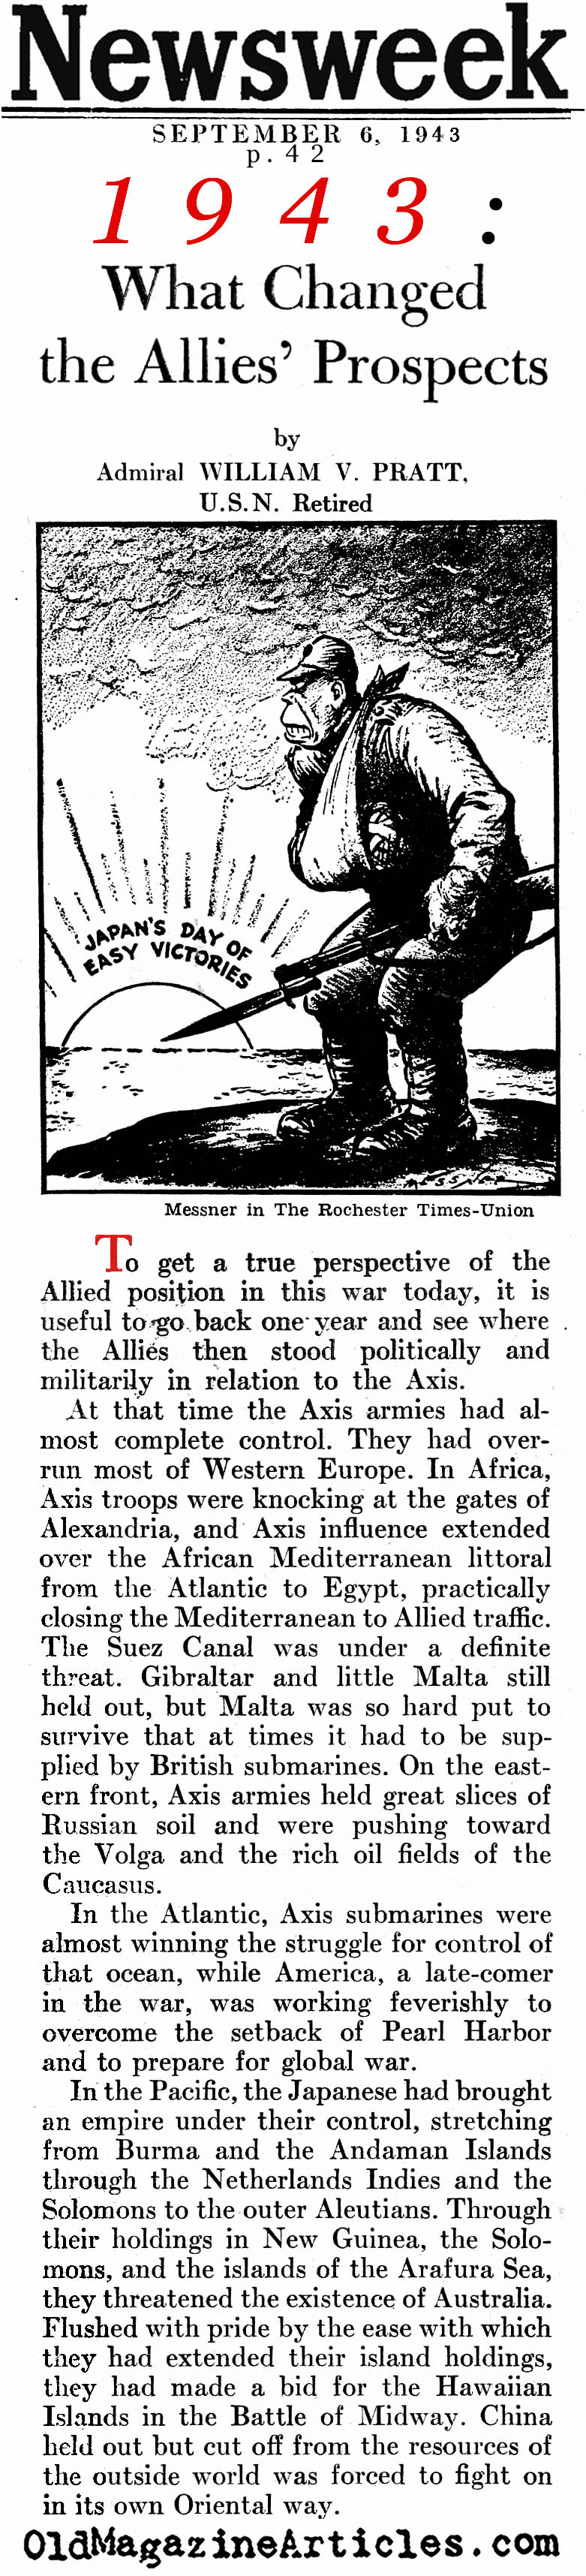 1943: The Year Everything Changed for the Allies (Newsweek Magazine, 1943)